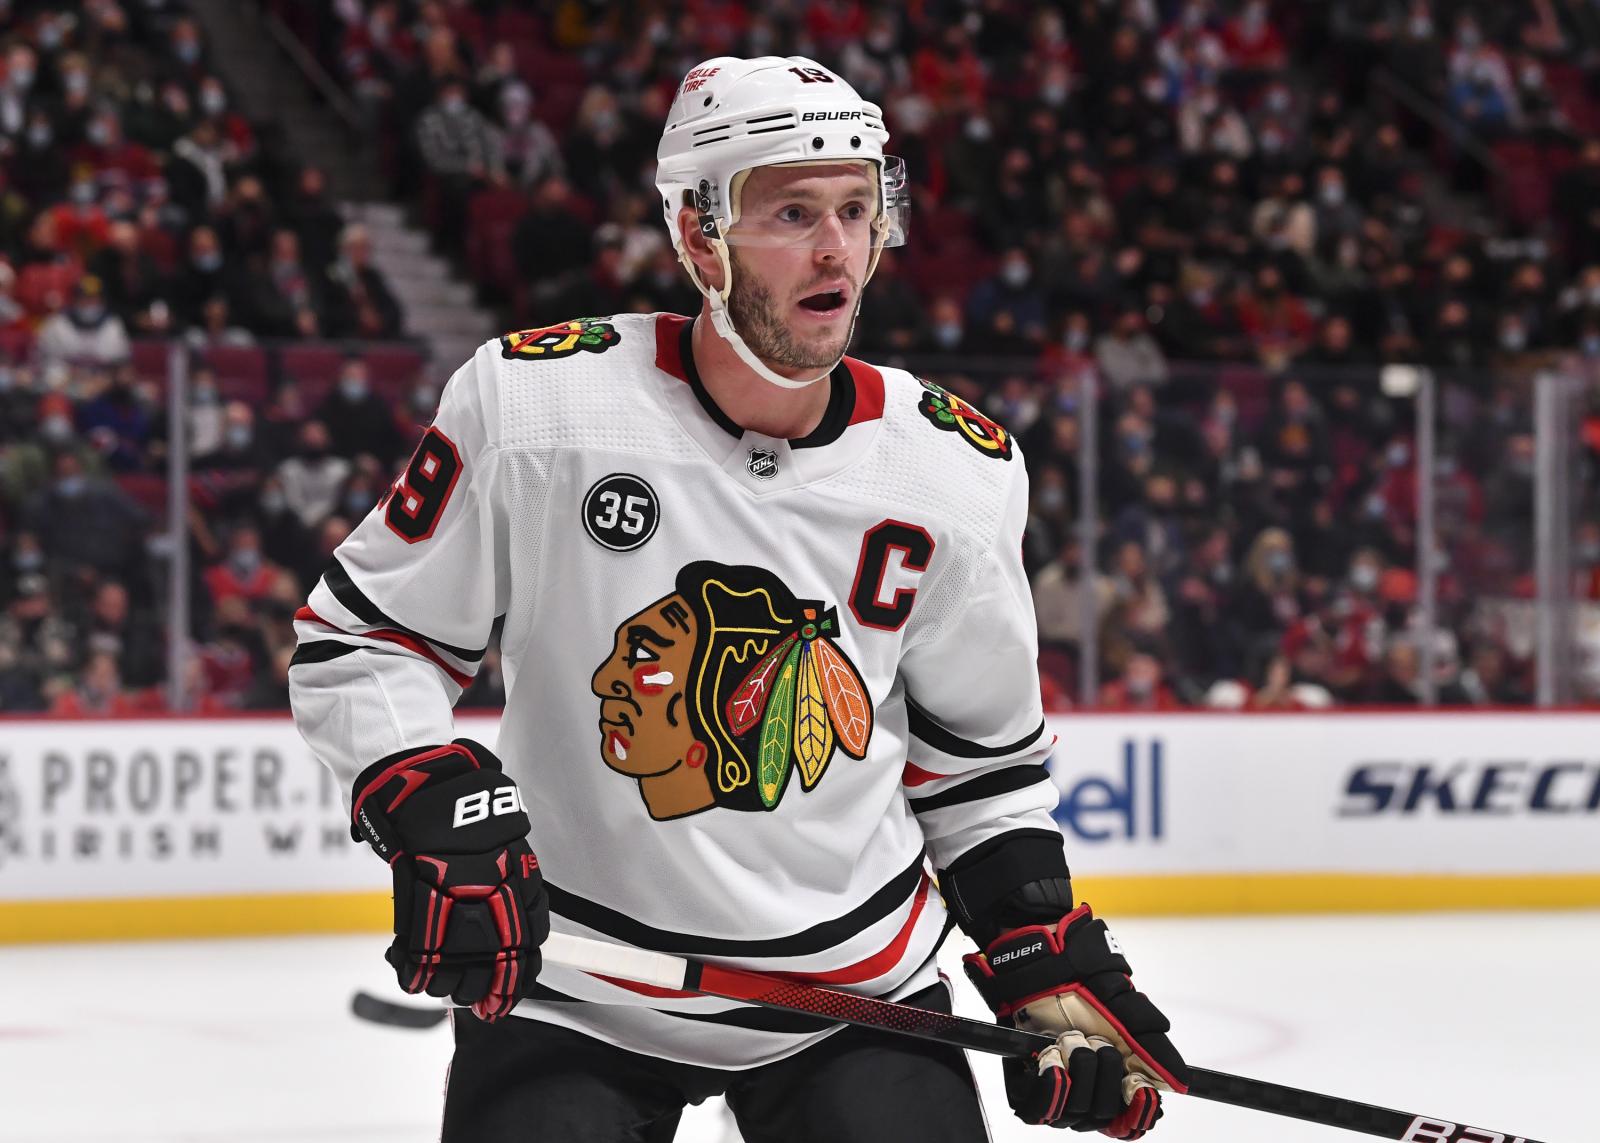 NHL 99: Beyond the myths and clichés, Jonathan Toews was the